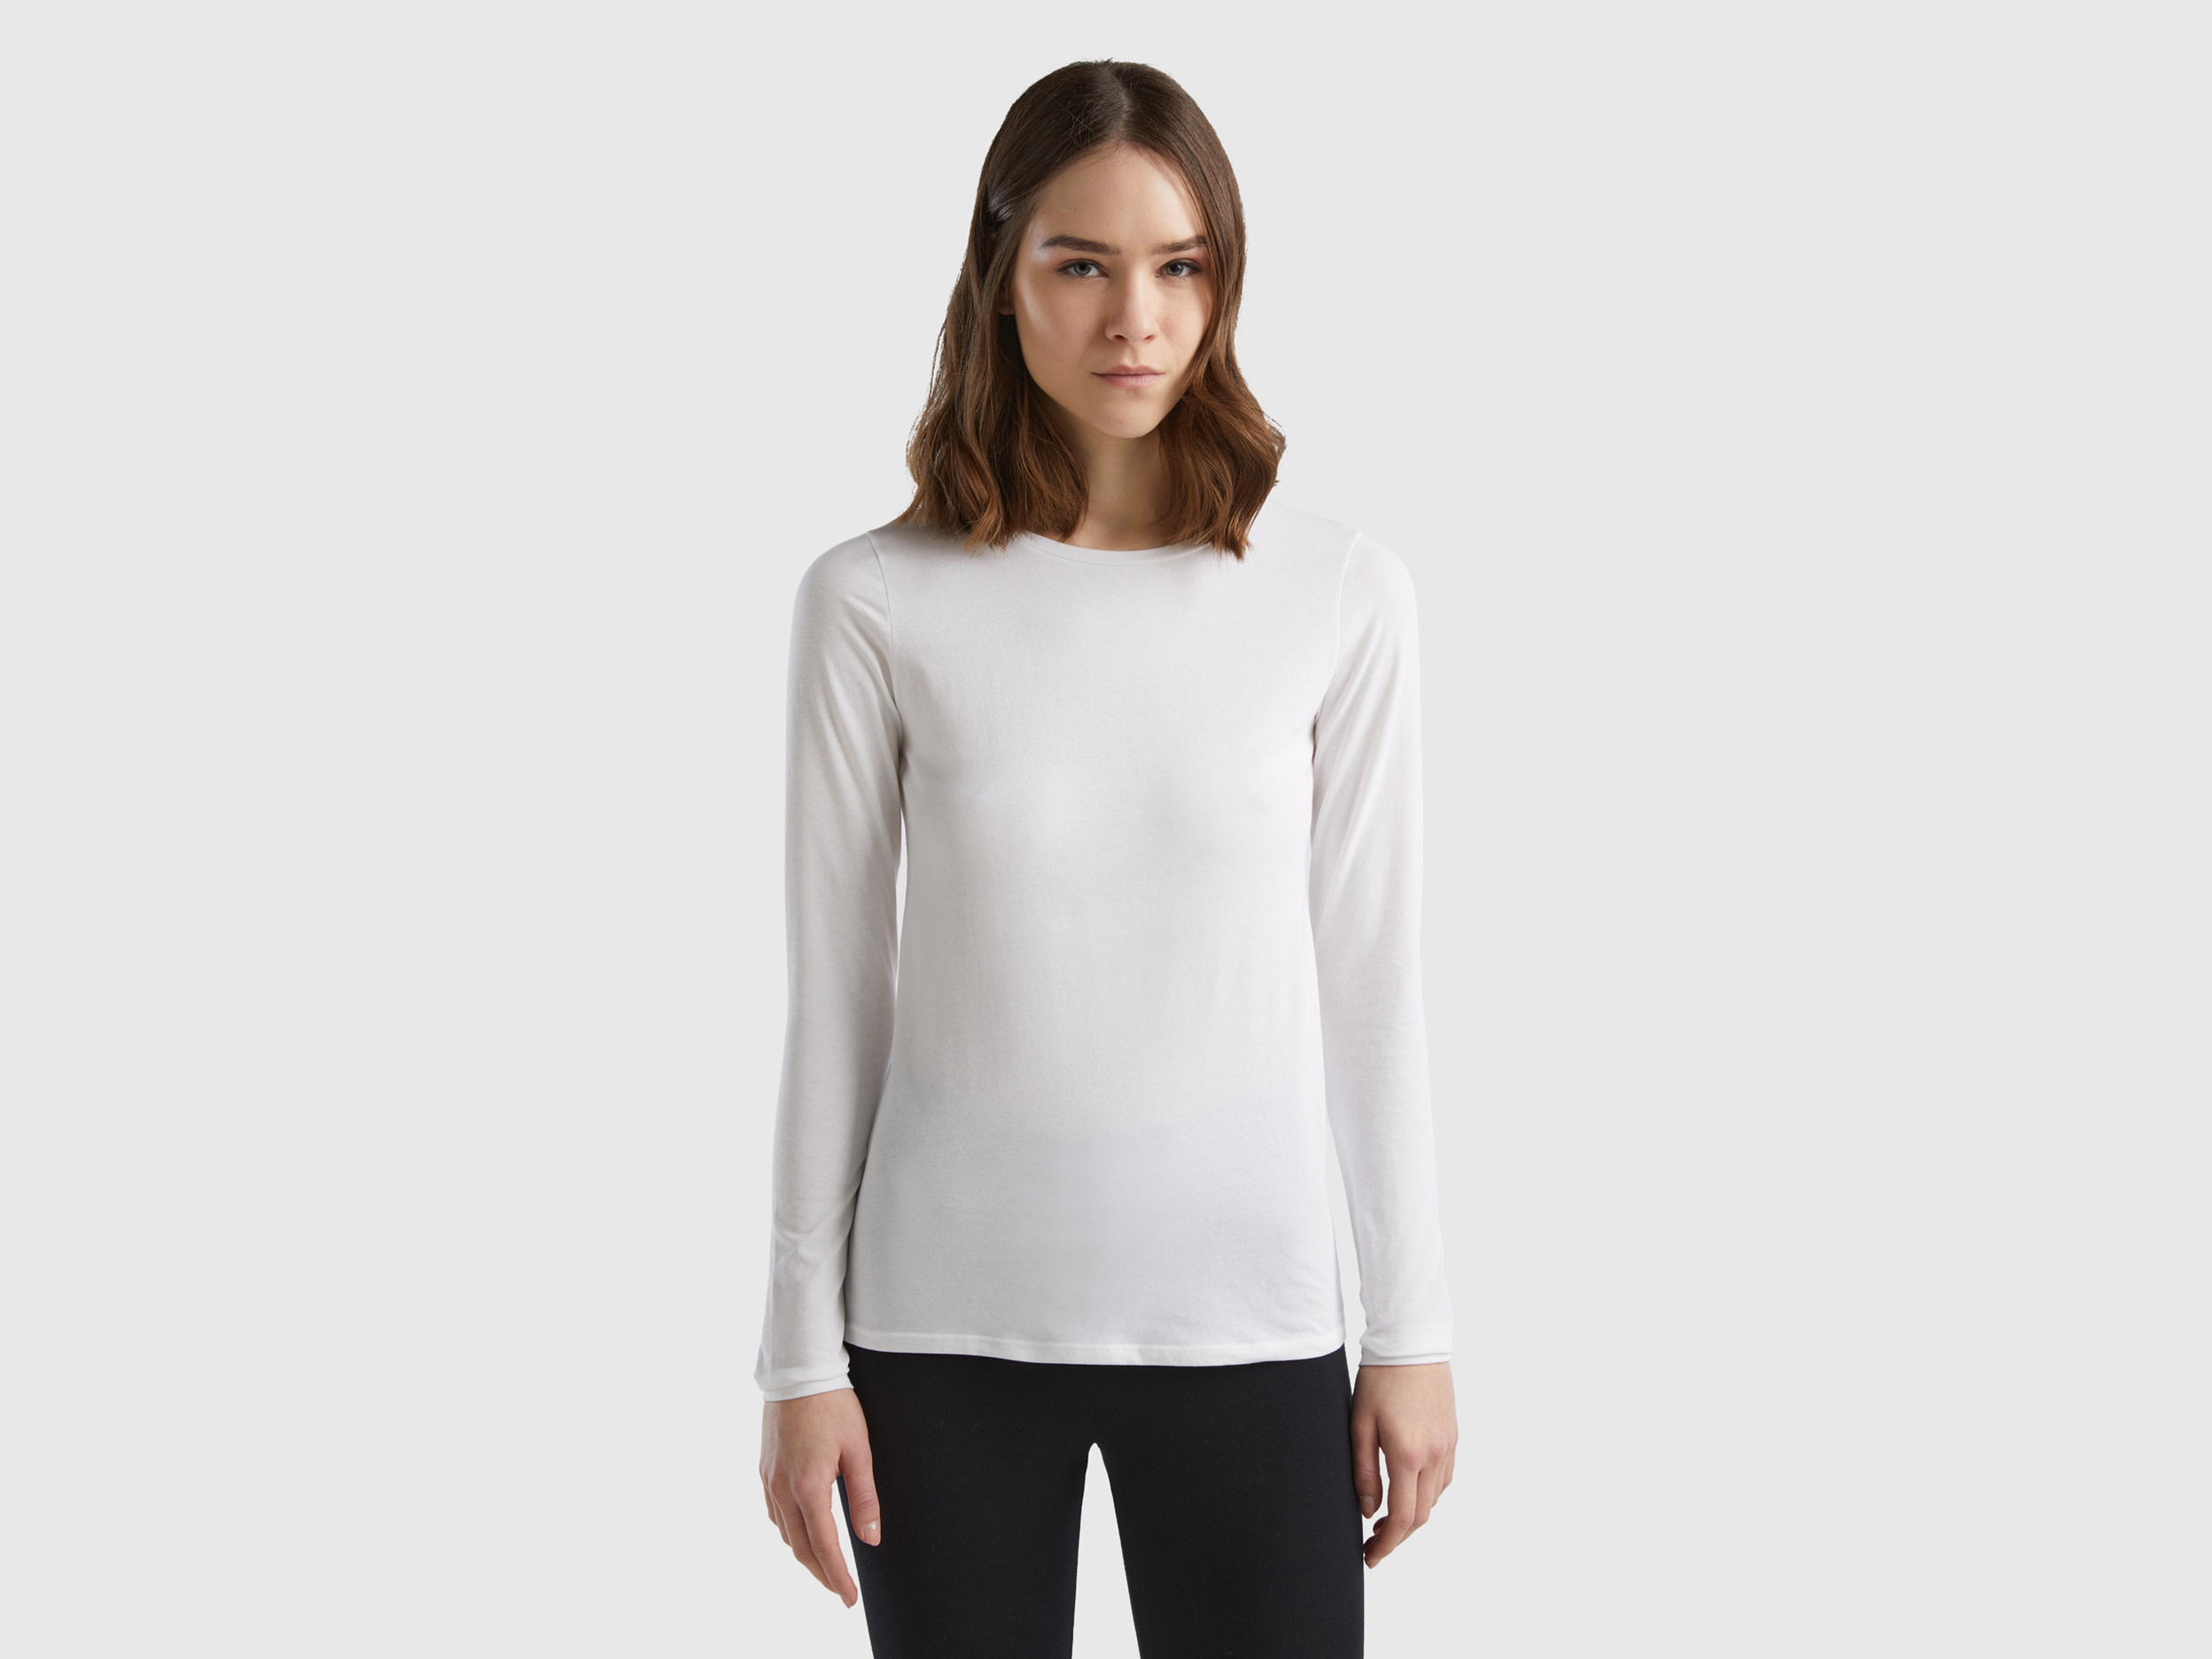 Image of Benetton, Long Sleeve Super Stretch T-shirt, size S, White, Women